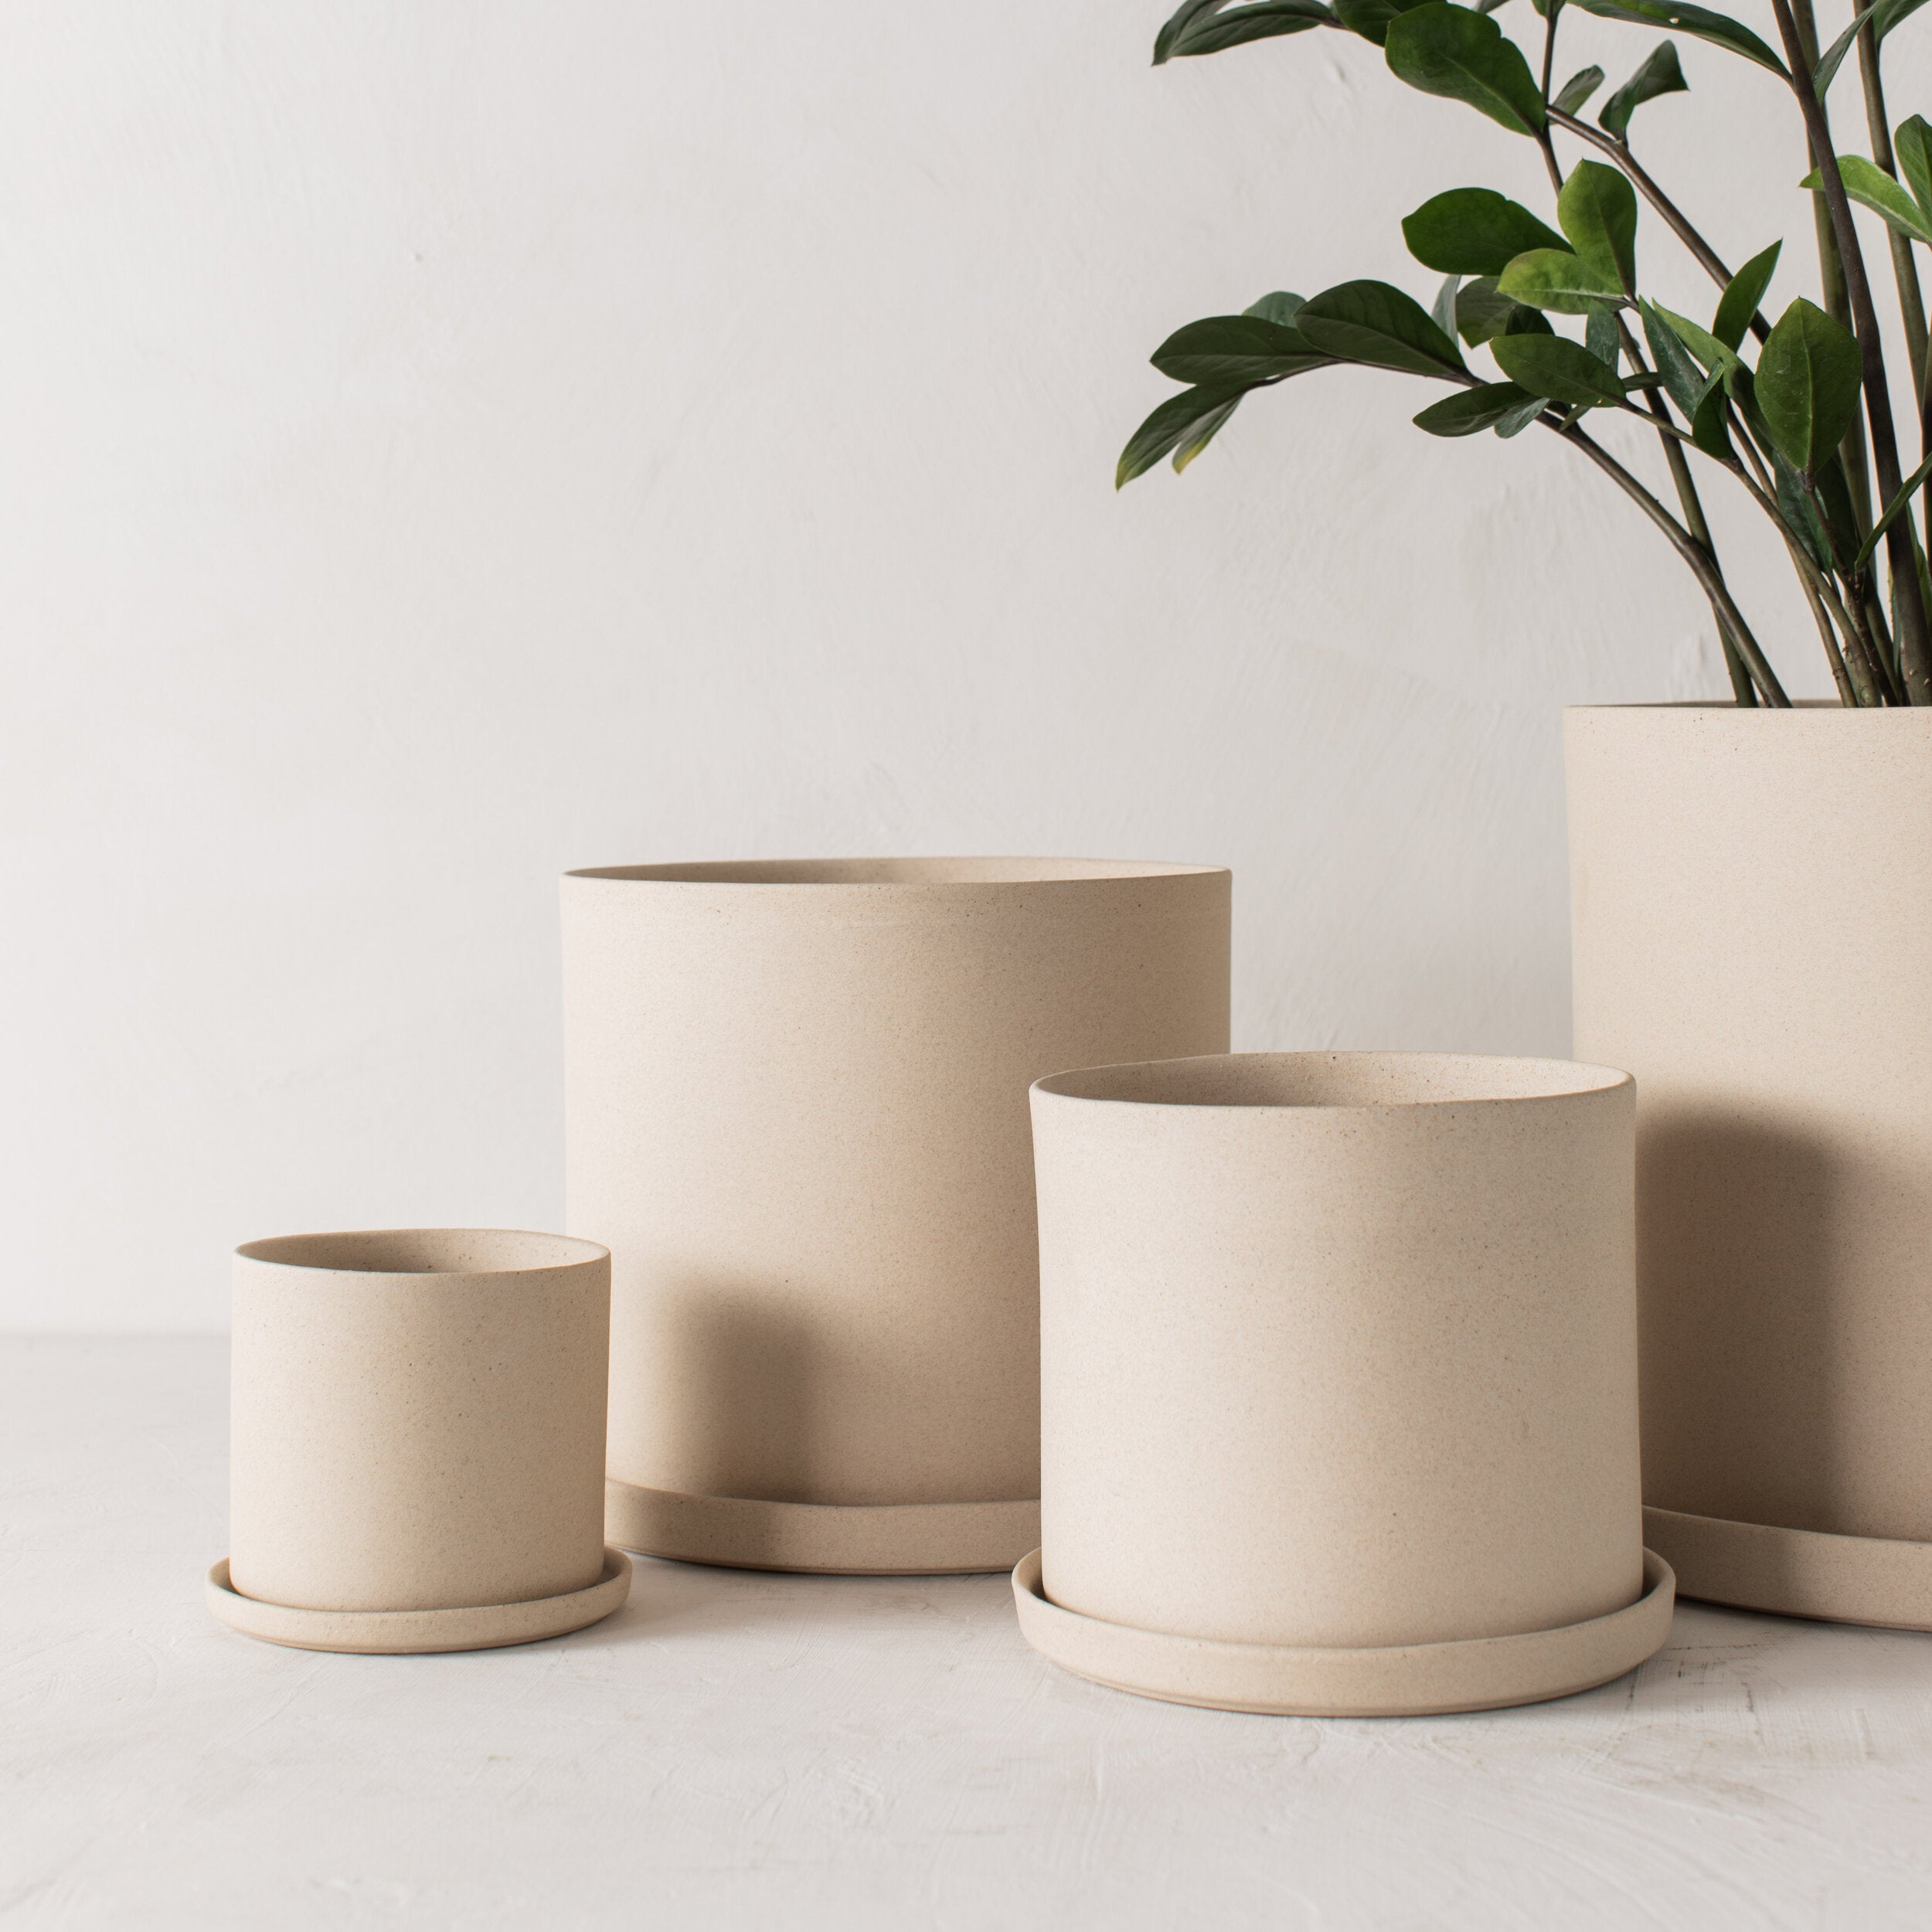 Four stoneware ceramic planters with bottom drainage dishes, 4, 6, 8, and 10 inches. Staged on a white plaster textured tabletop against a plaster textured white wall. Large tall zz plant inside the 10 inch. Designed by Convivial Production, sold by Shop Verdant Kansas City plant store.